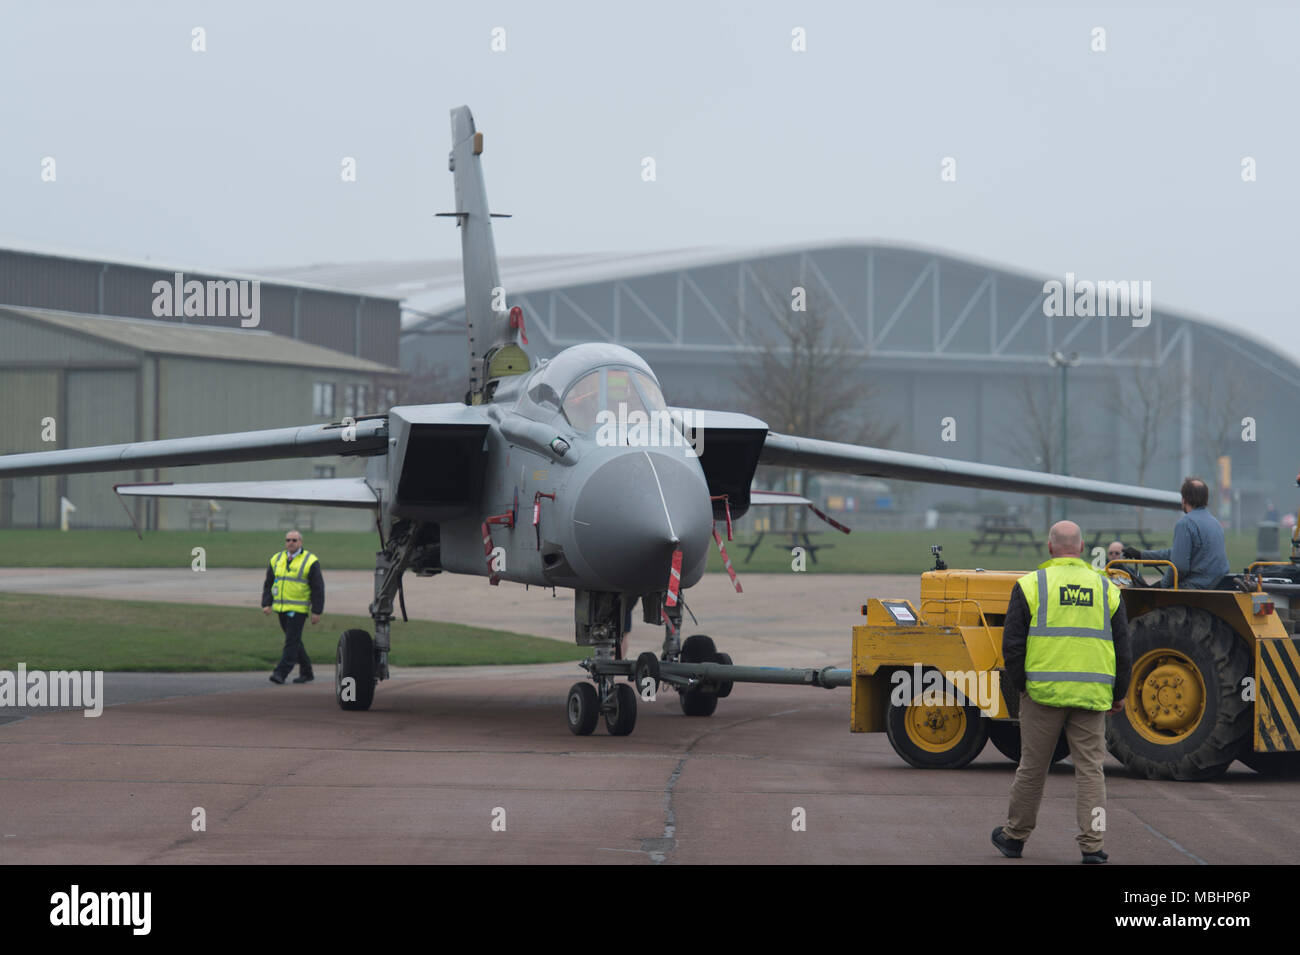 IWM Duxford, Cambridgeshire, UK. 11 April 2018. Imperial War Museums, working with RAF Marham, add Tornado GR4 ZA469 to the displays at IWM Duxford. Tornado GR4 ZA469 is transported from the Conservation Hall in AirSpace to the Battle of Britain exhibition, where it goes on display to visitors from 11 April 2018. The Tornado GR4 is the most significant combat jet used by the RAF during the last 27 years and continues in service until 2019. Credit: Malcolm Park/Alamy Live News. Stock Photo